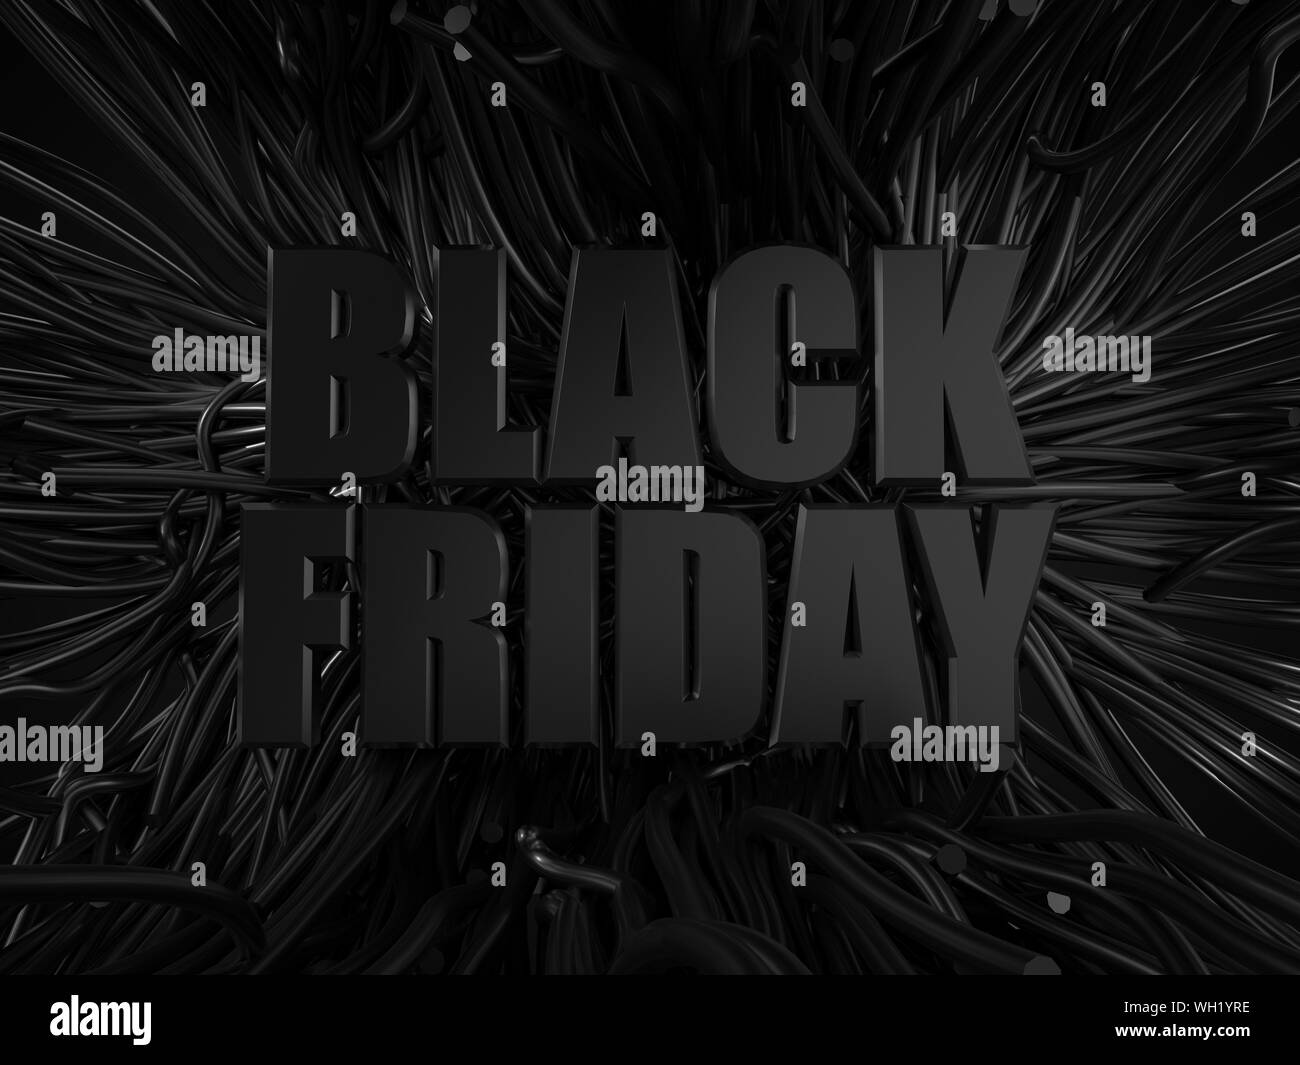 black friday text with black tentacles on background. dark themed 3d illustration. Stock Photo